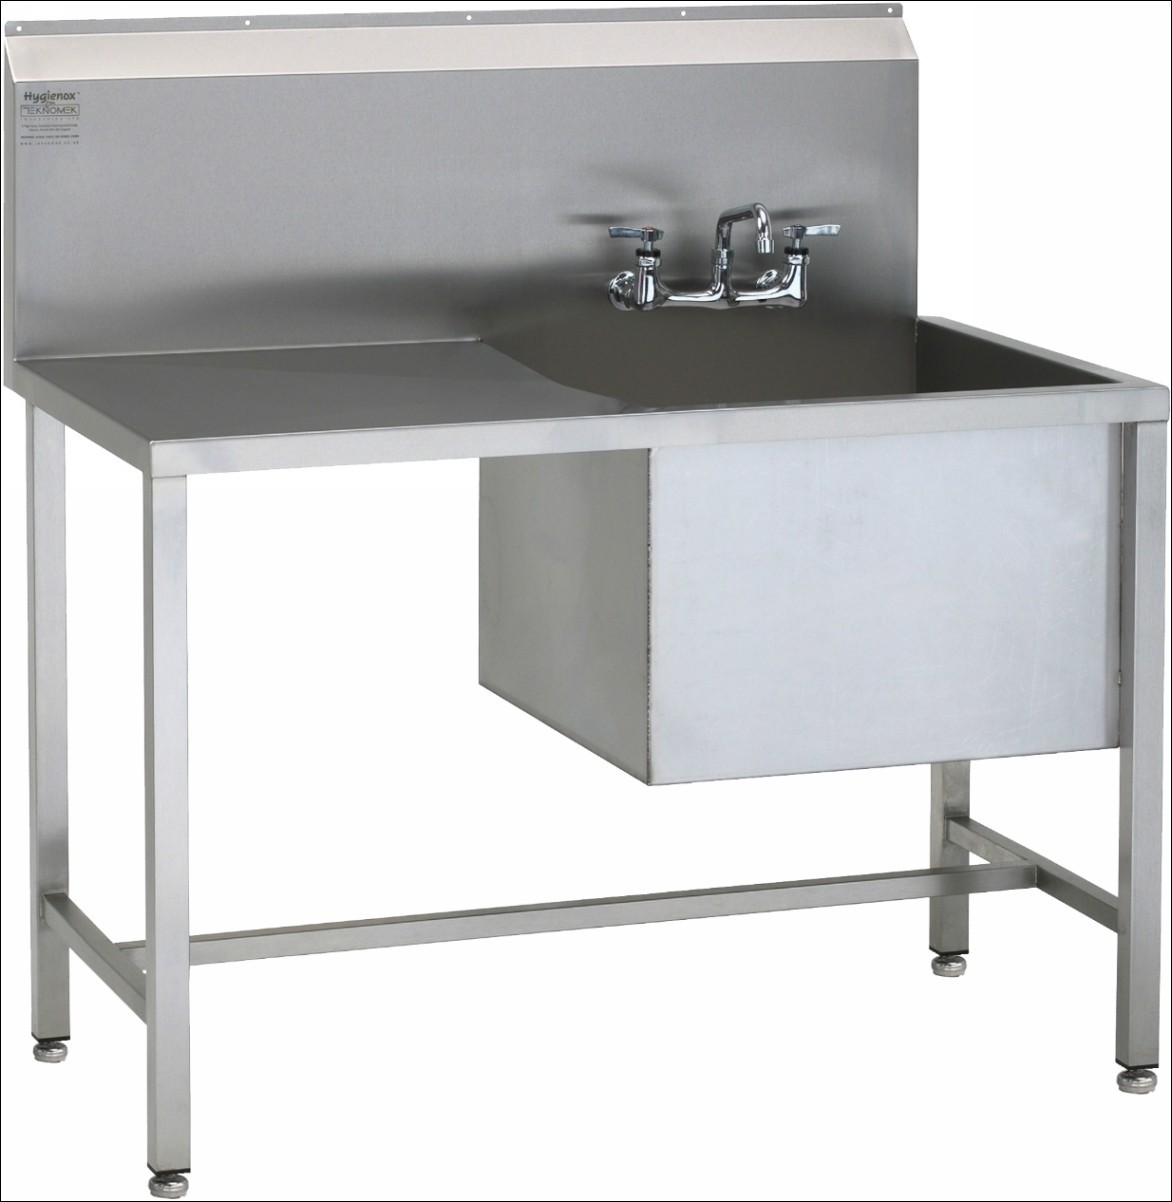 Stainless Steel Utility Belfast Sinks With Drainer 